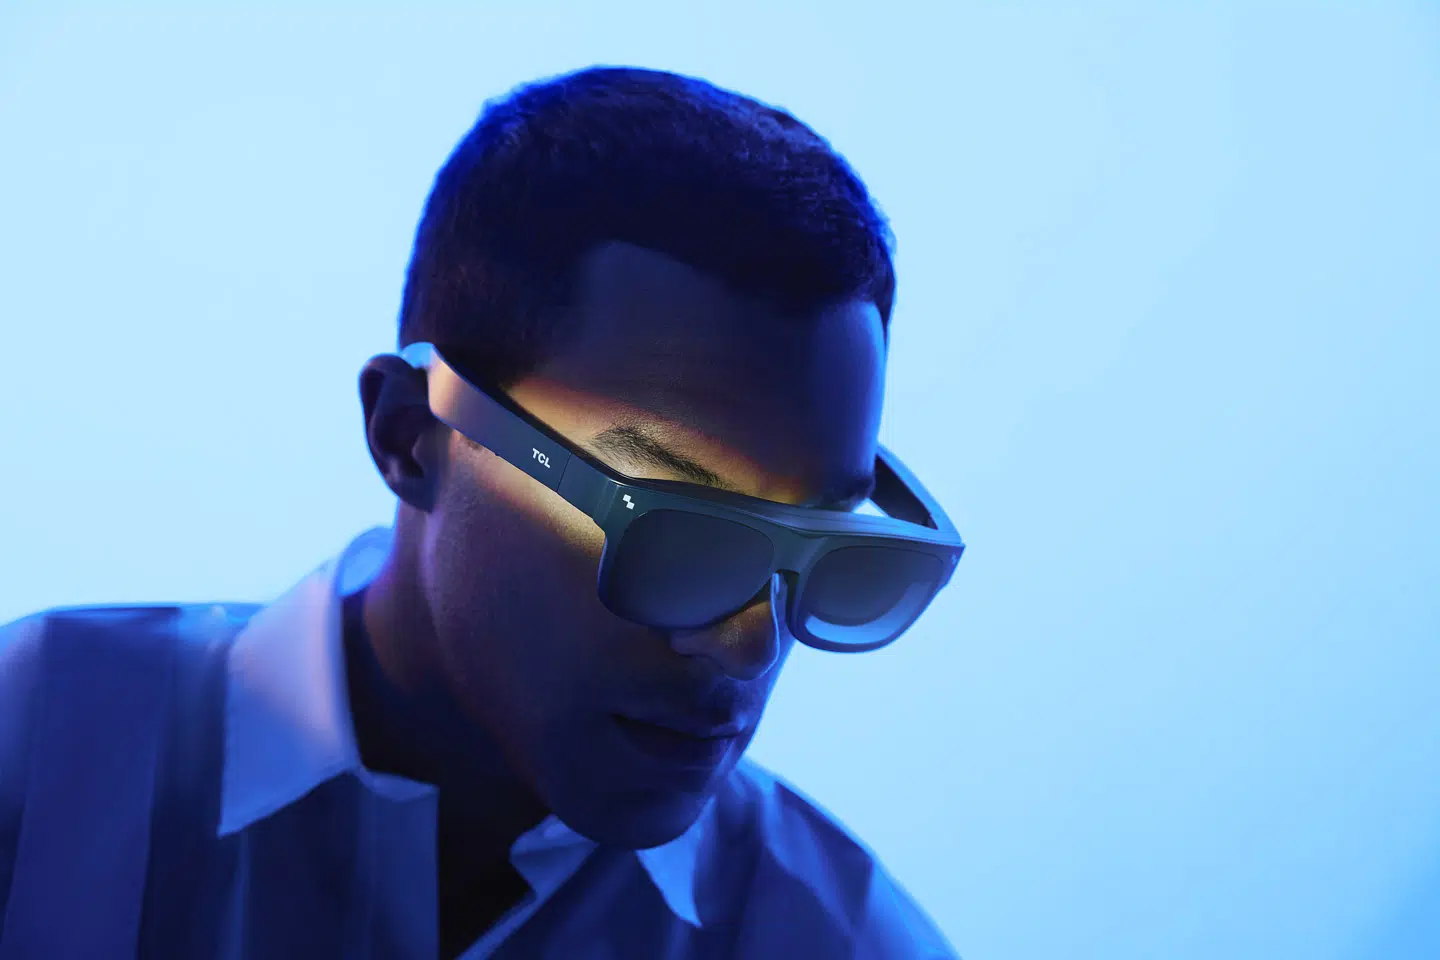 man wearing Bose sunglasses with tinted lenses